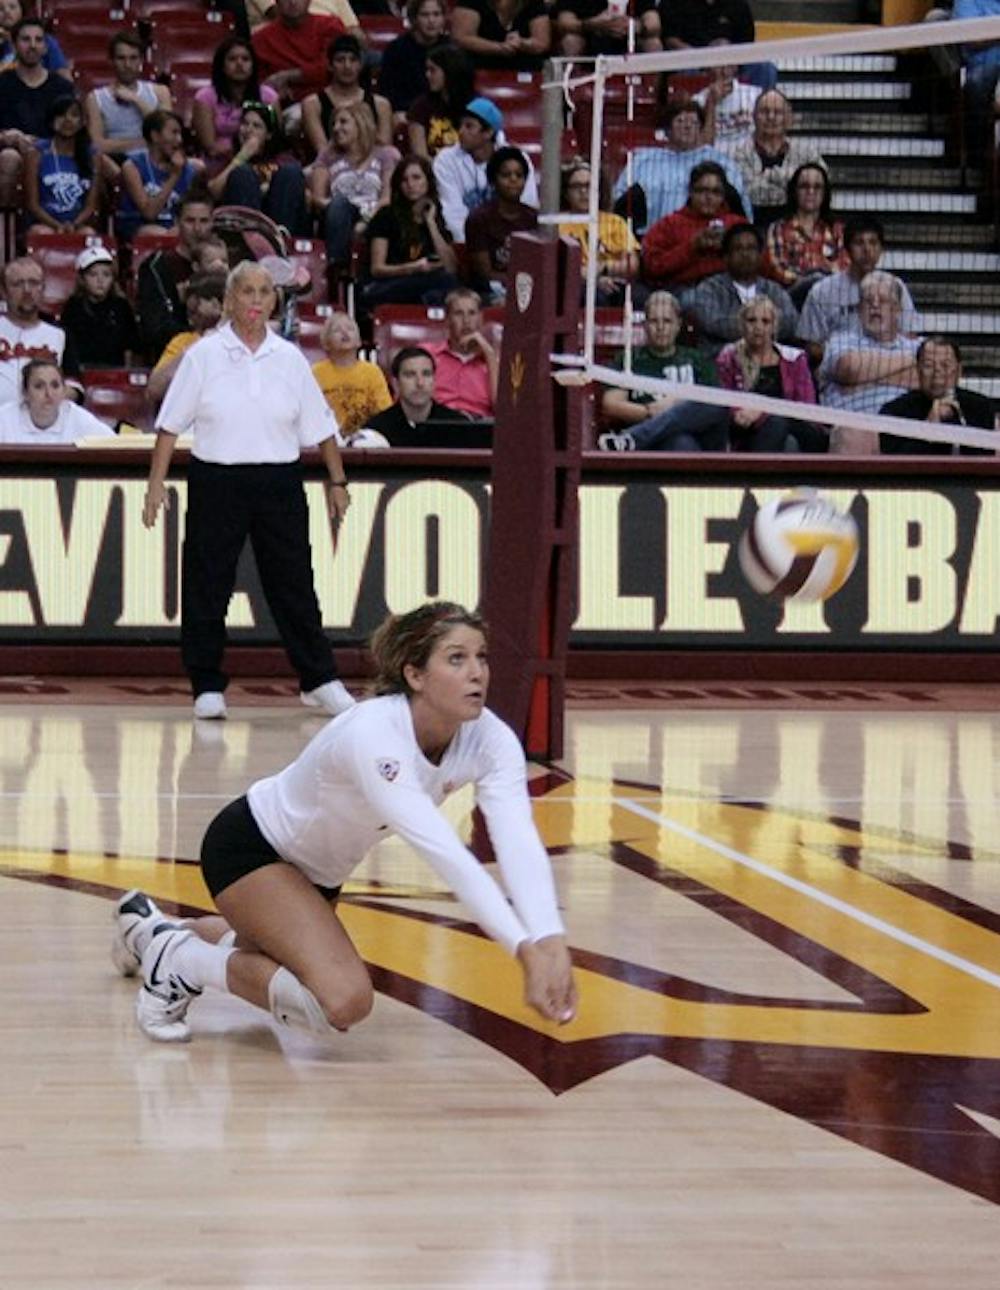 FIGHTING THE LOWS: Redshirt sophomore outside hitter Ashley Kastl digs for the ball during the Sun Devils’ 3-0 loss to No. 2 UCLA on Friday. Kastl contributed a match-best in kills with 23 against No. 5 USC despite the tough loss. (Photo by Michaela Mader)